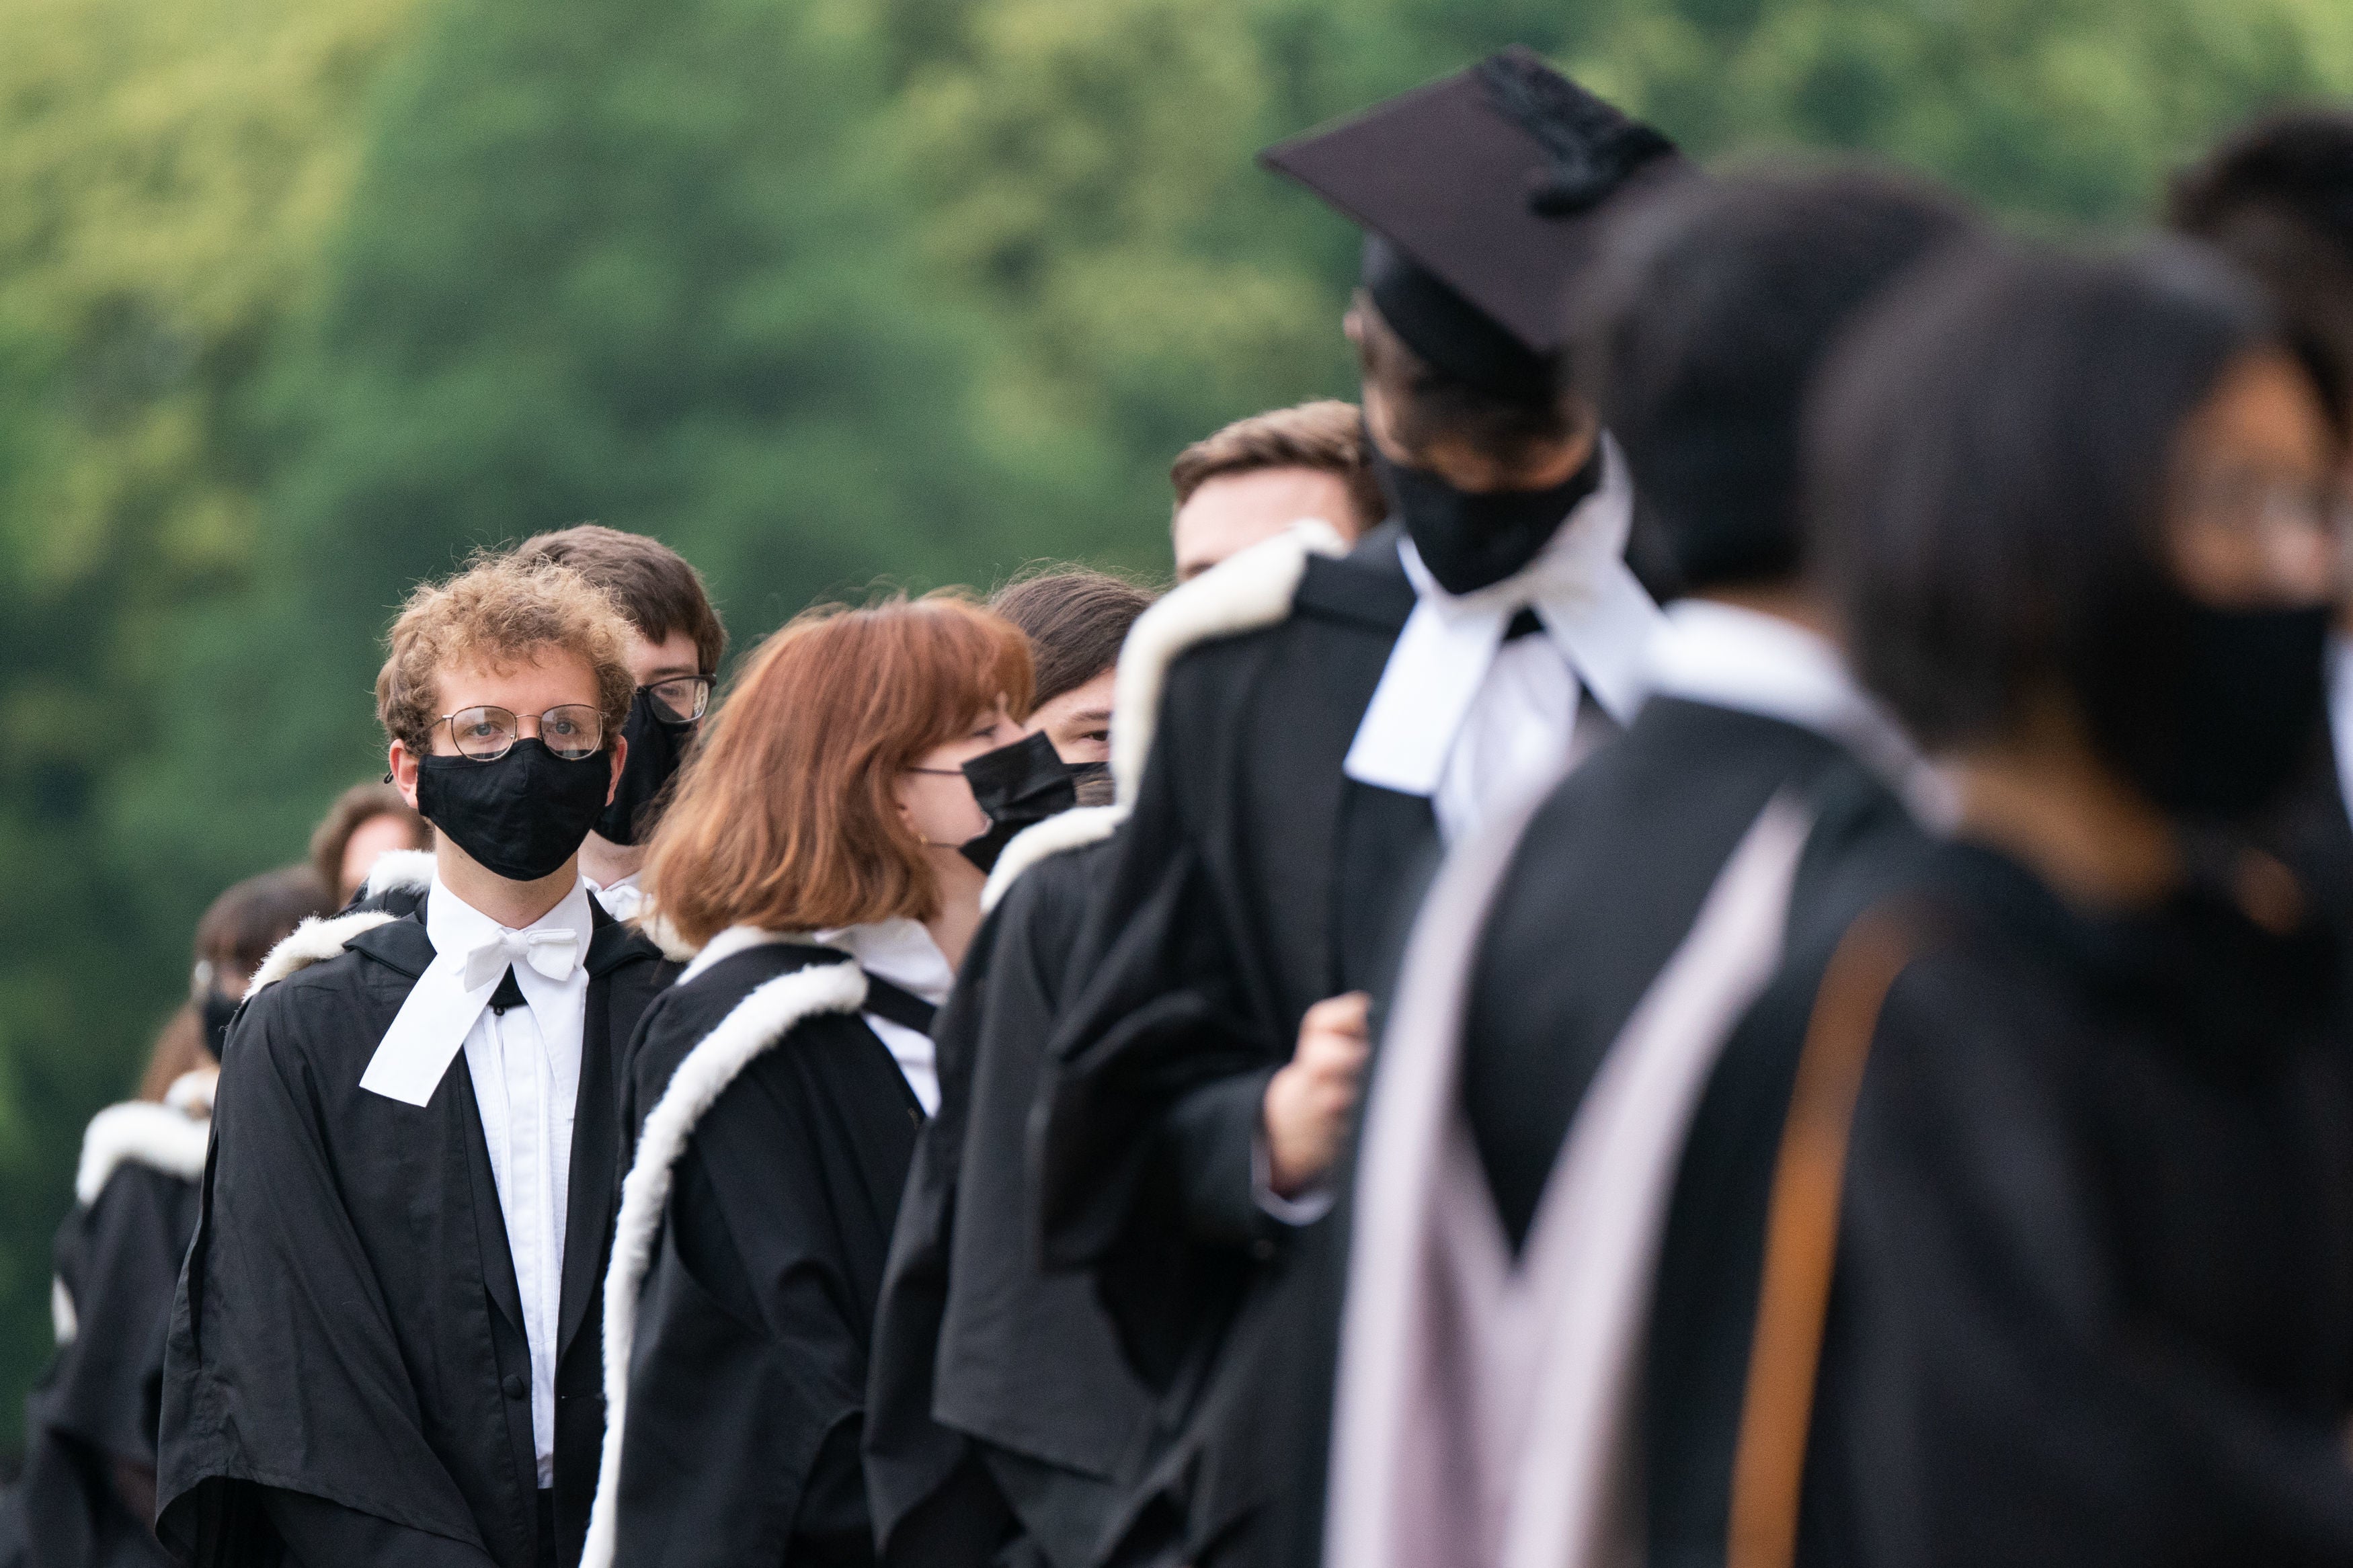 Graduates can end up leaving university with debts of £60,000